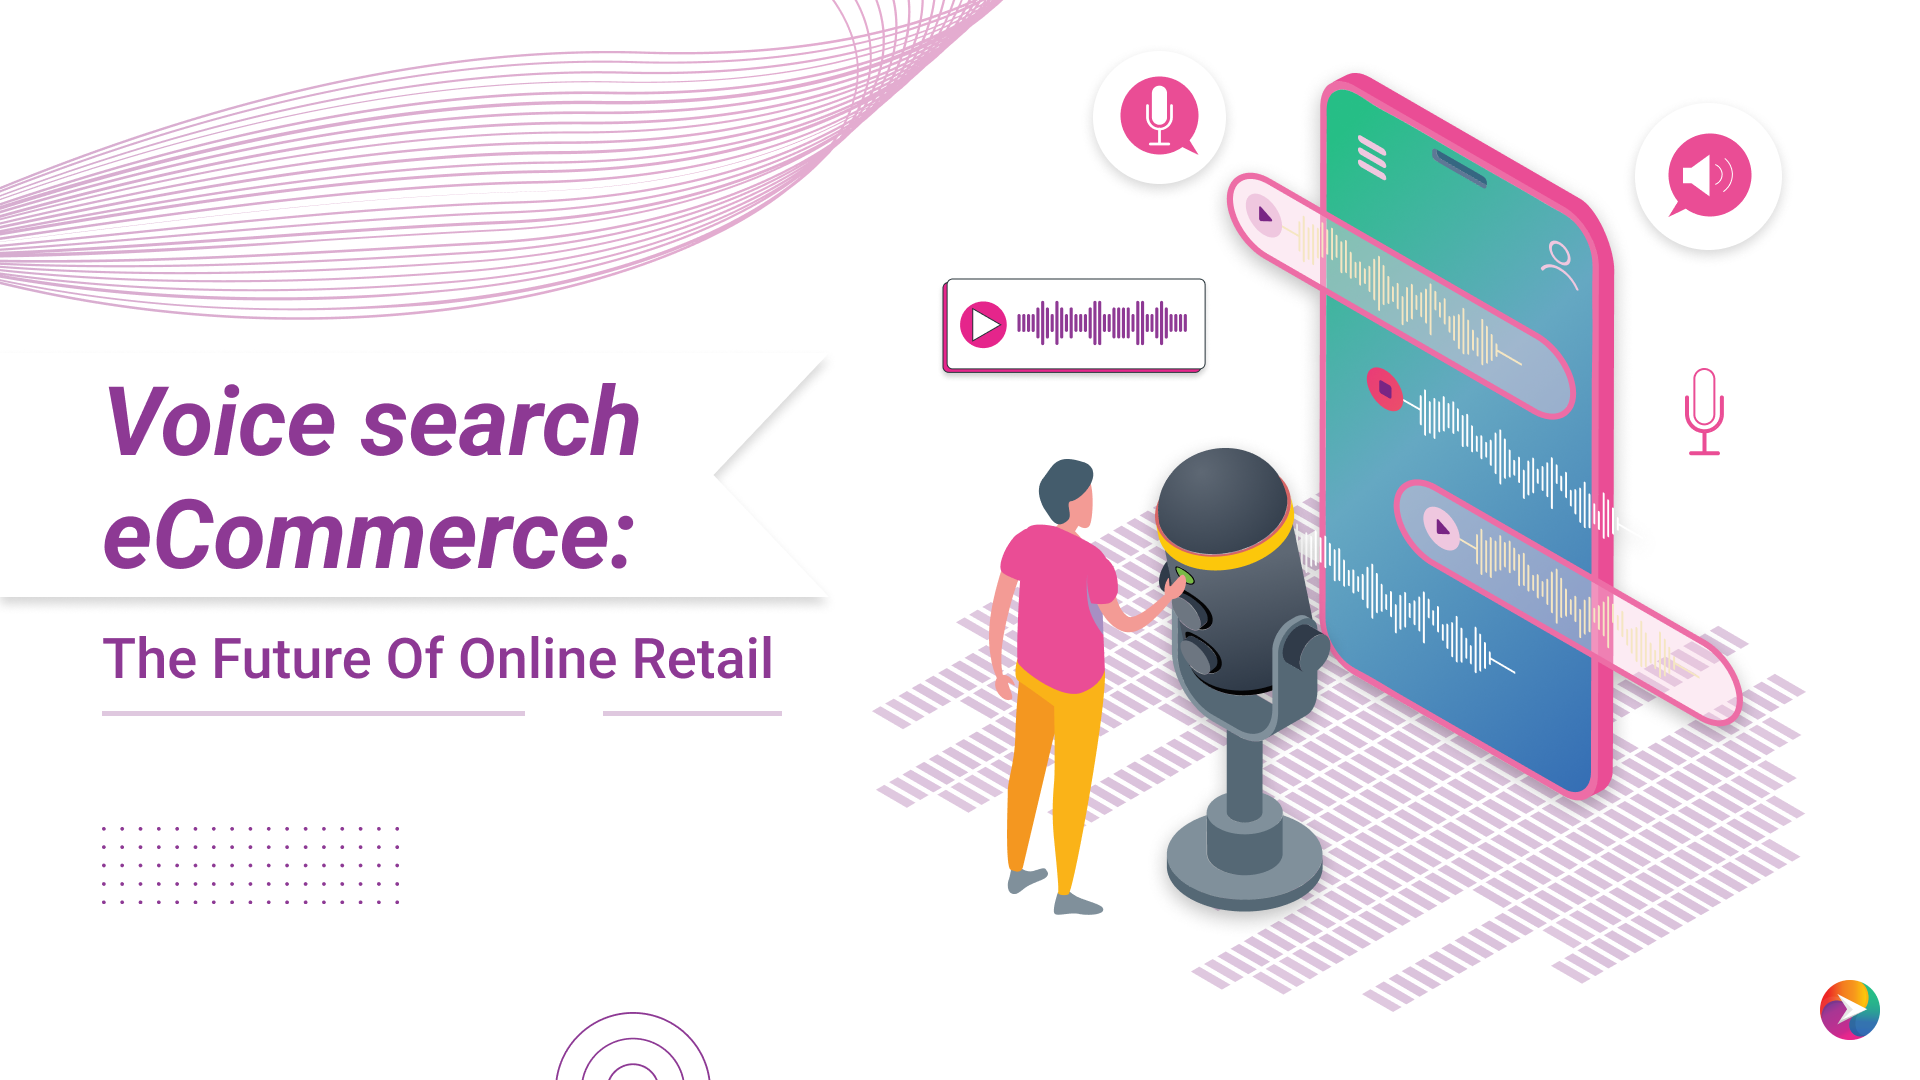 Voice Search eCommerce: The Future of Online Retail